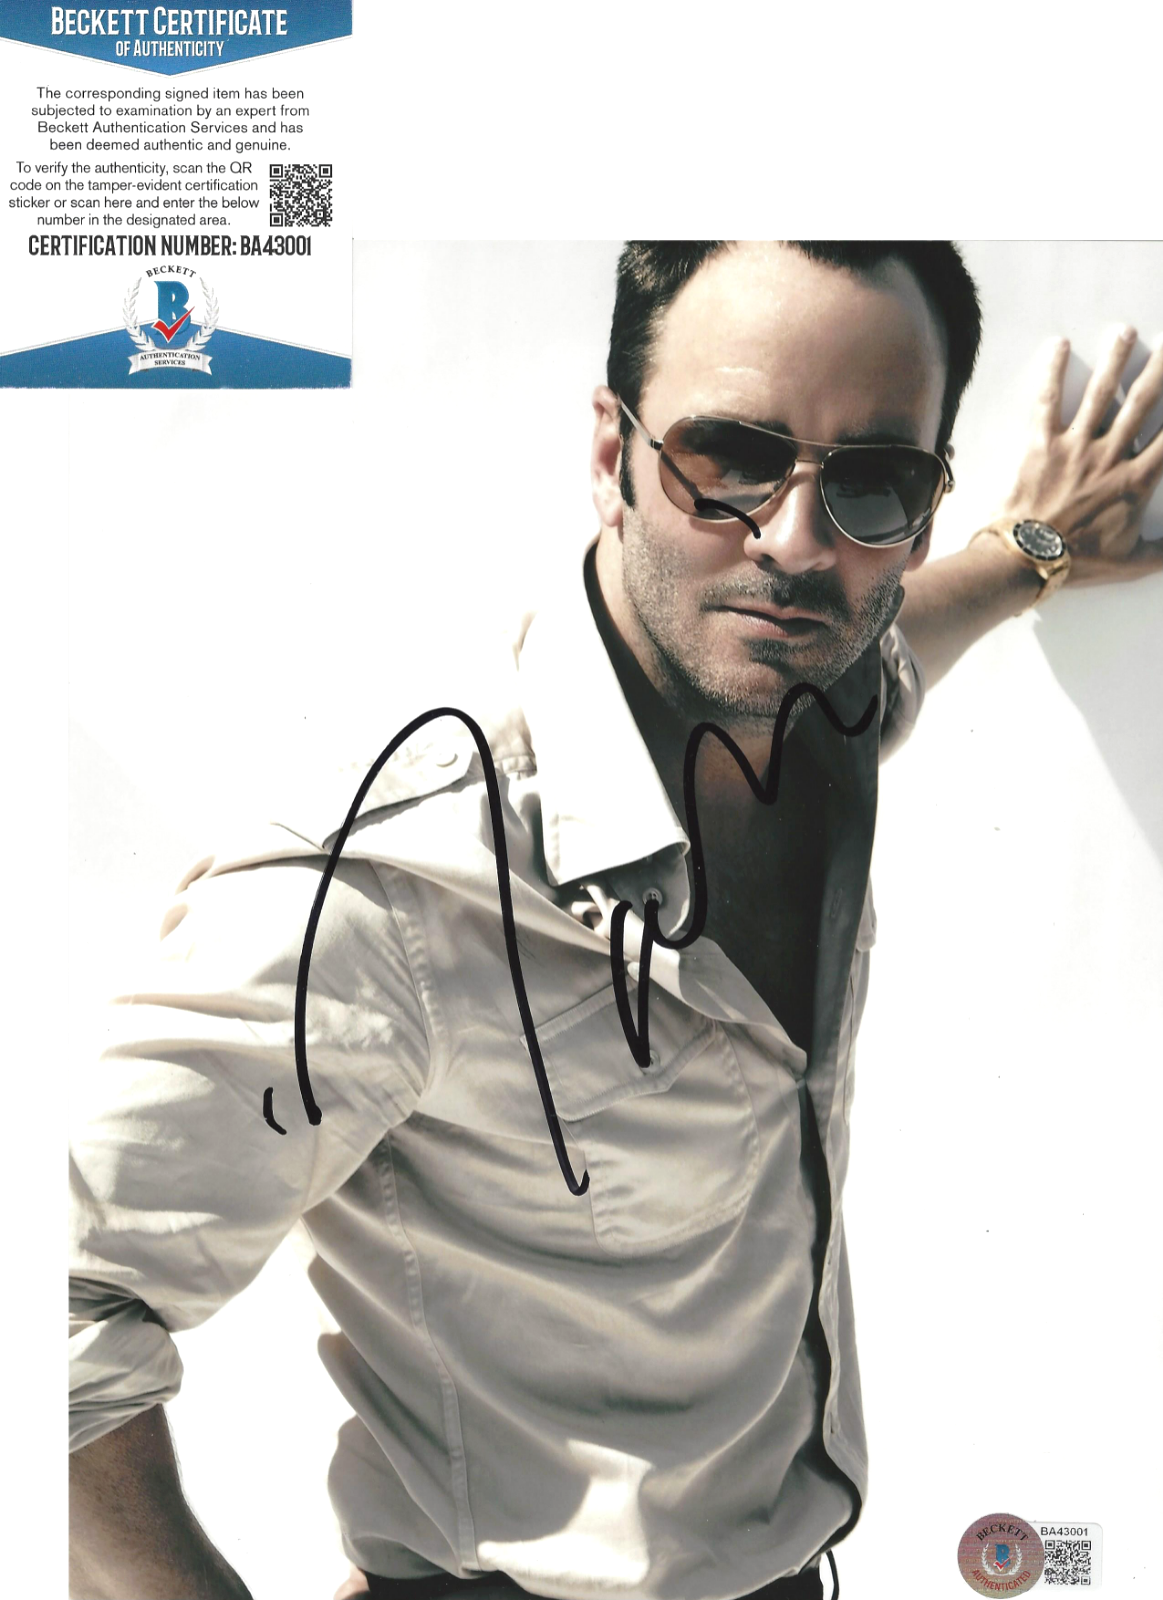 TOM FORD SIGNED NOCTURNAL ANIMALS 8x10 Photo Poster painting FASHION DIRECTOR BECKETT COA BAS